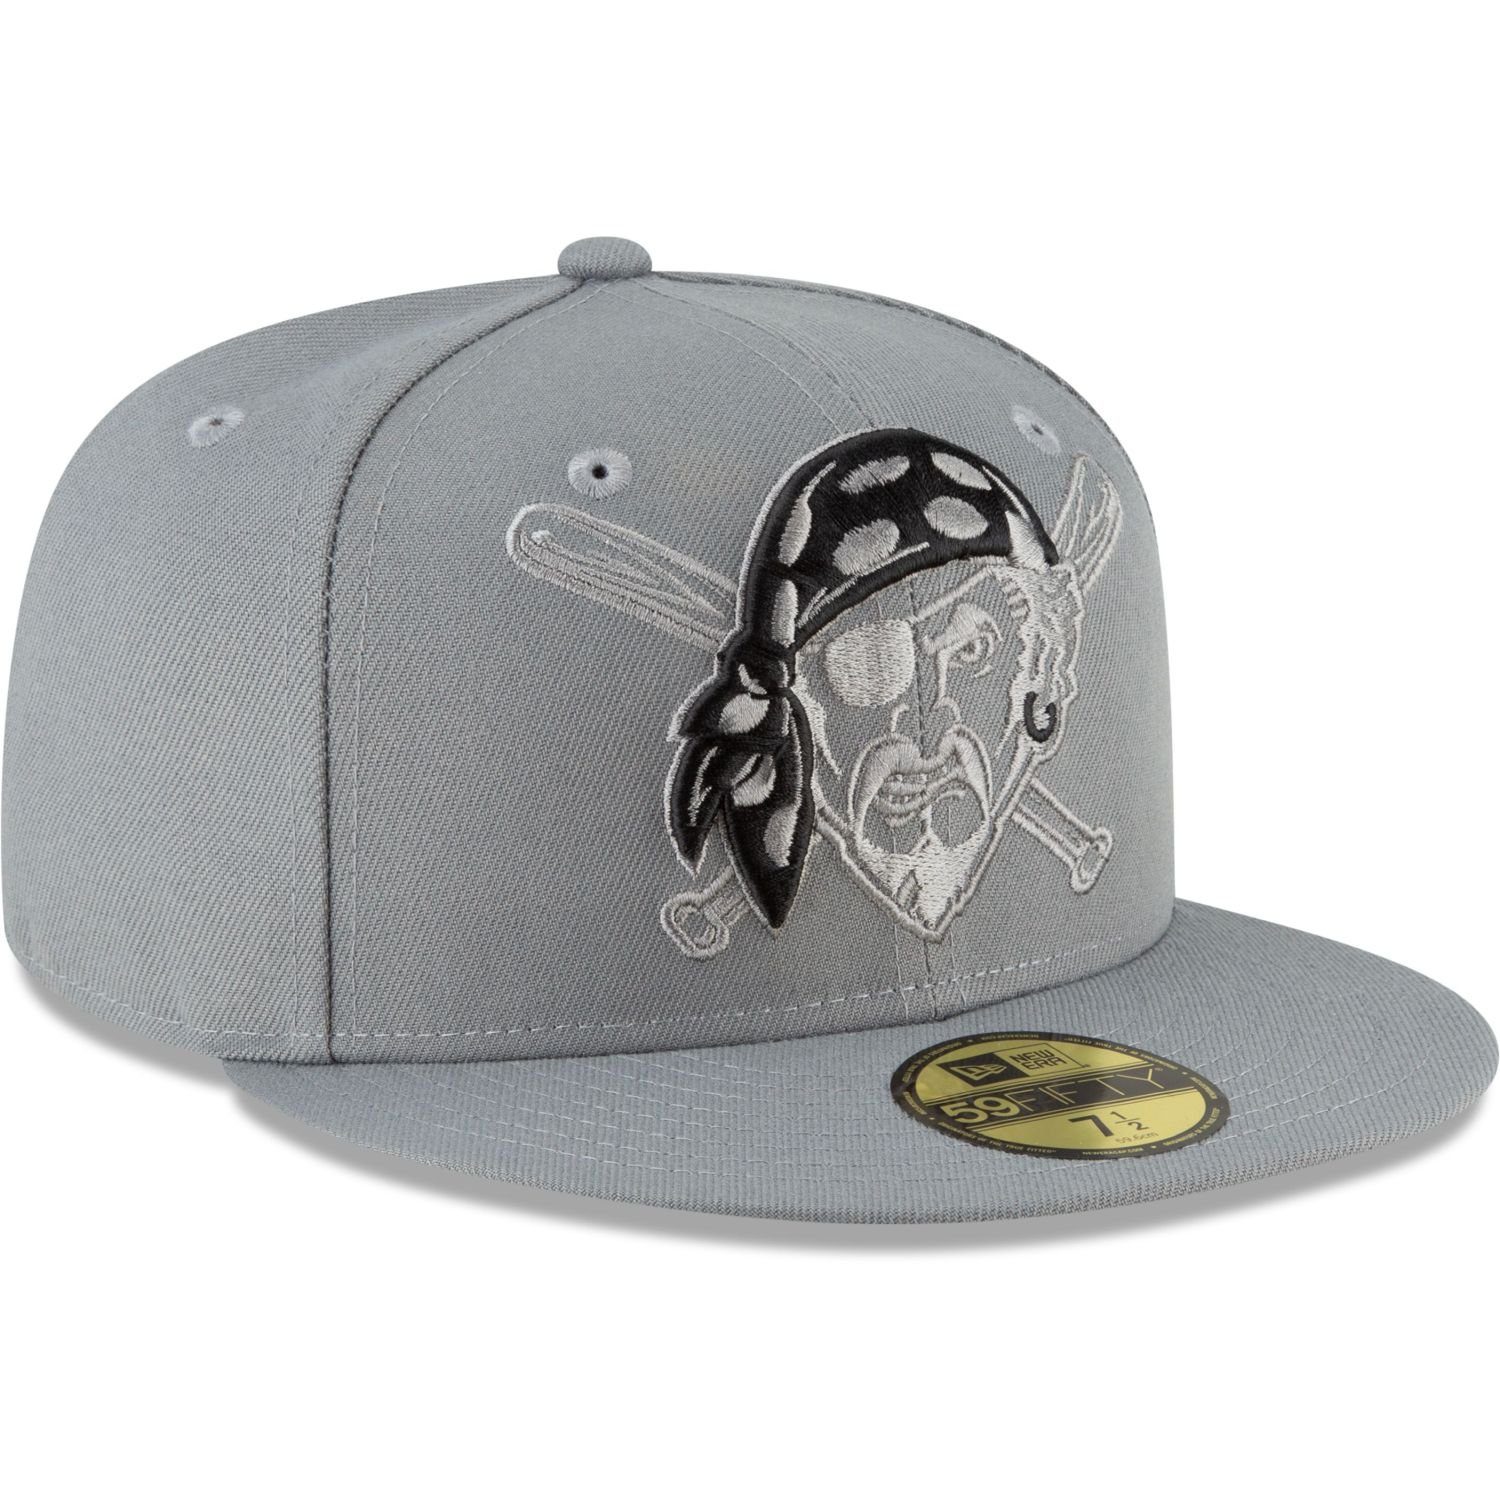 Cap Pittsburgh Cooperstown Pirates STORM Team MLB Era New Fitted GREY 59Fifty